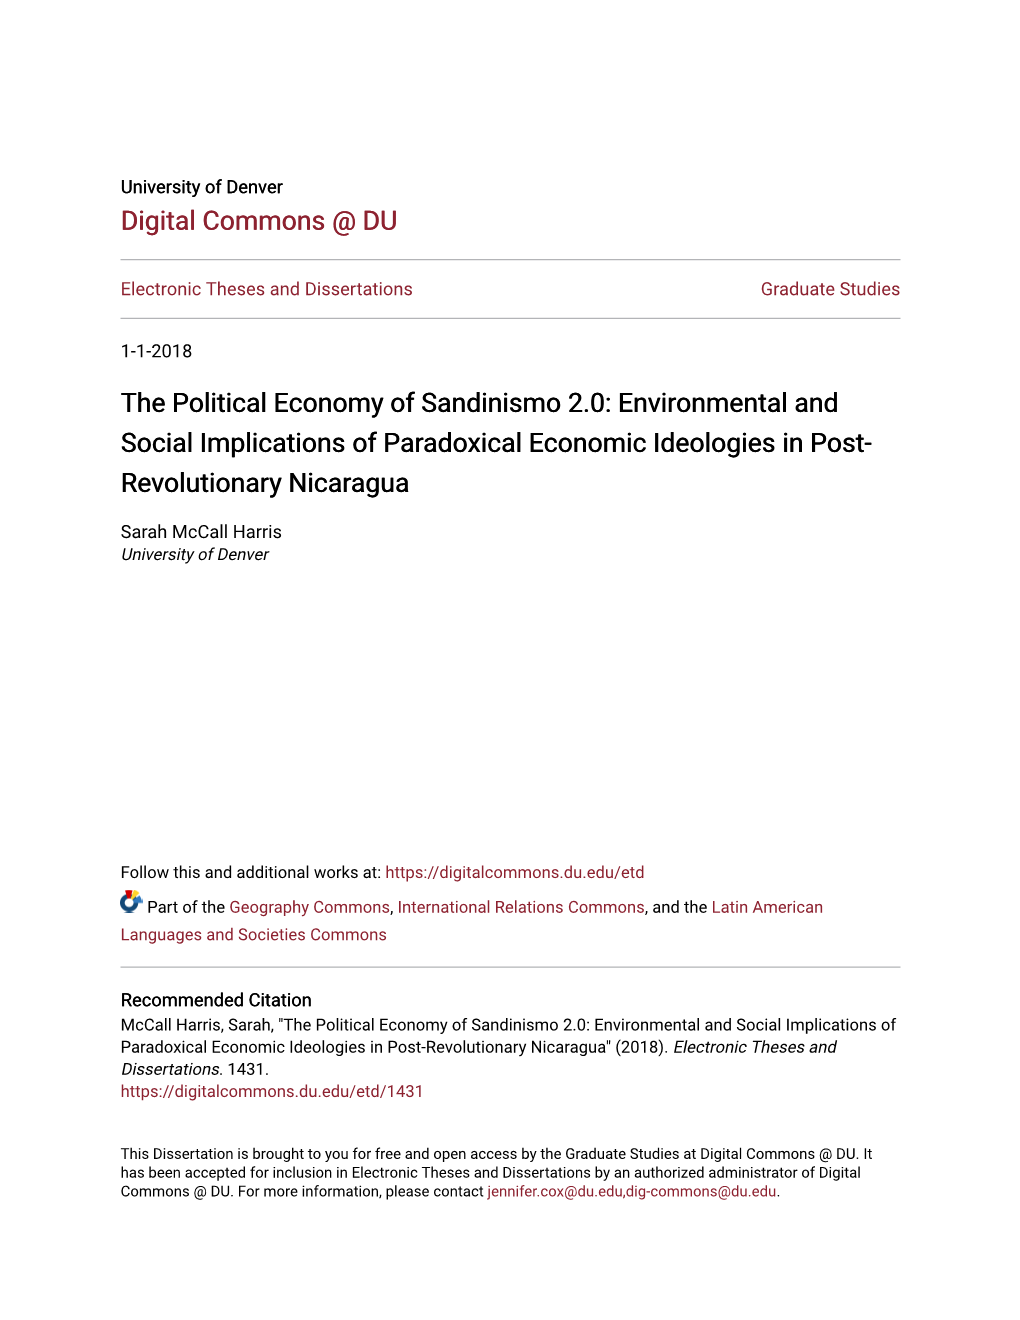 The Political Economy of Sandinismo 2.0: Environmental and Social Implications of Paradoxical Economic Ideologies in Post- Revolutionary Nicaragua